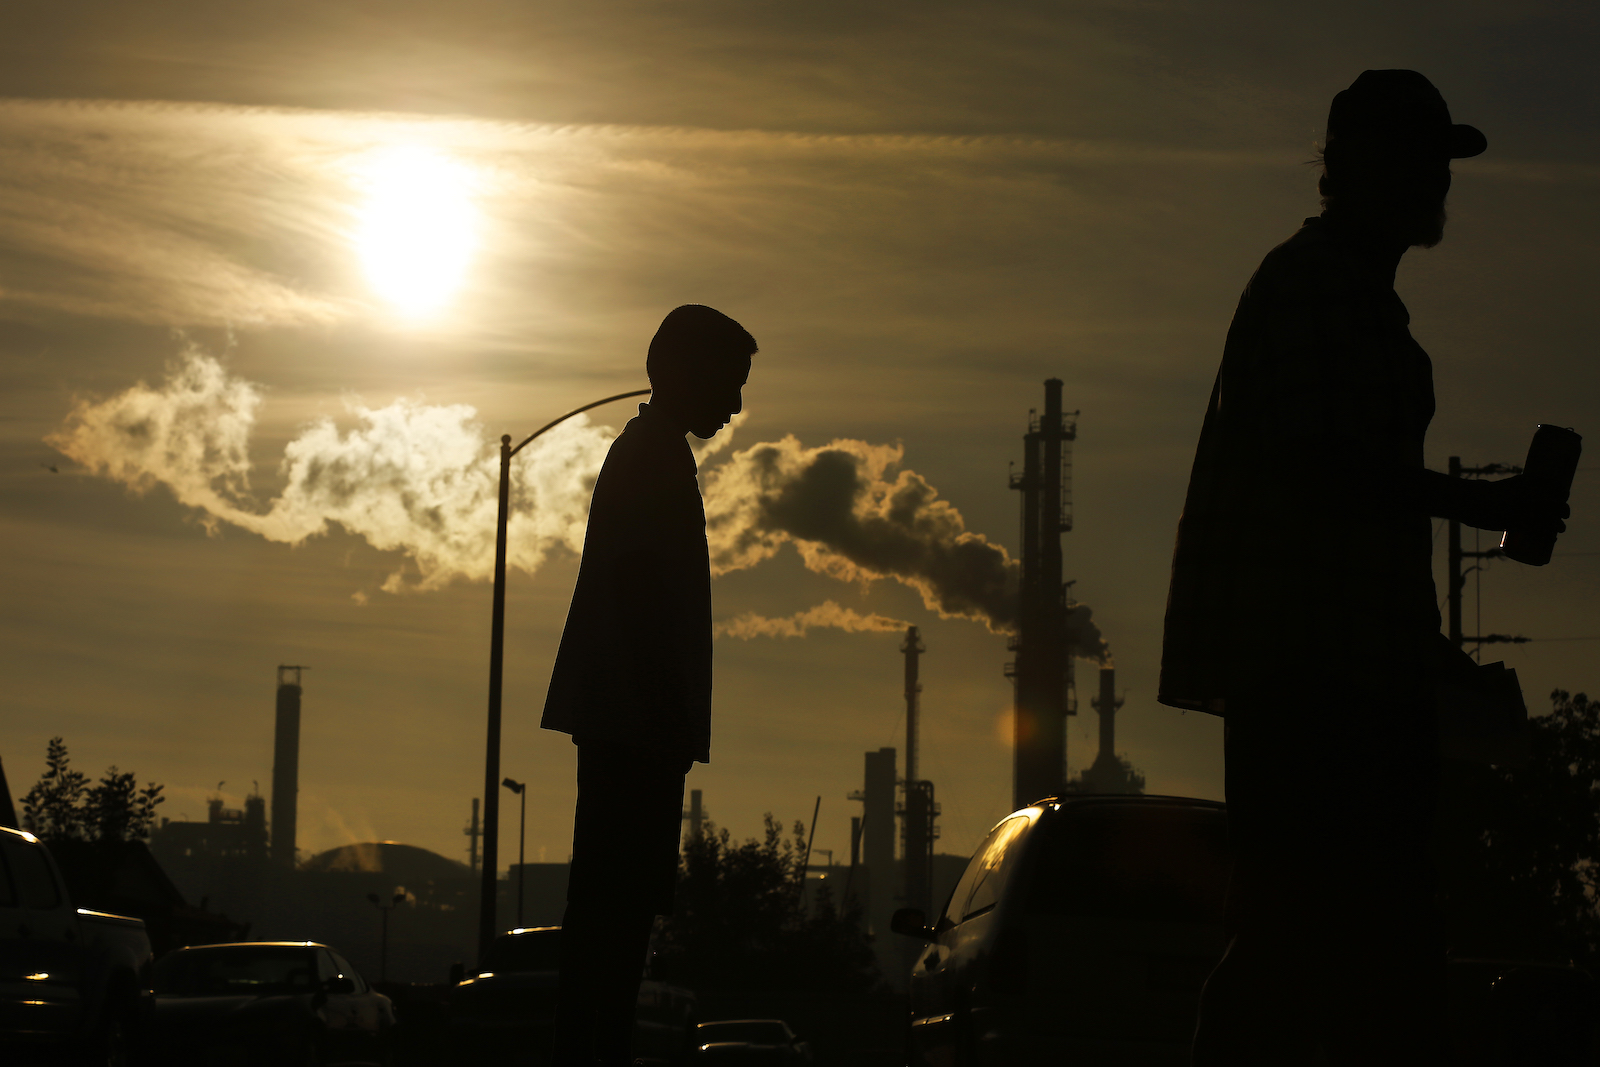 A silhouette of a young boy backdrops a plume of smoke rising from a refinery.